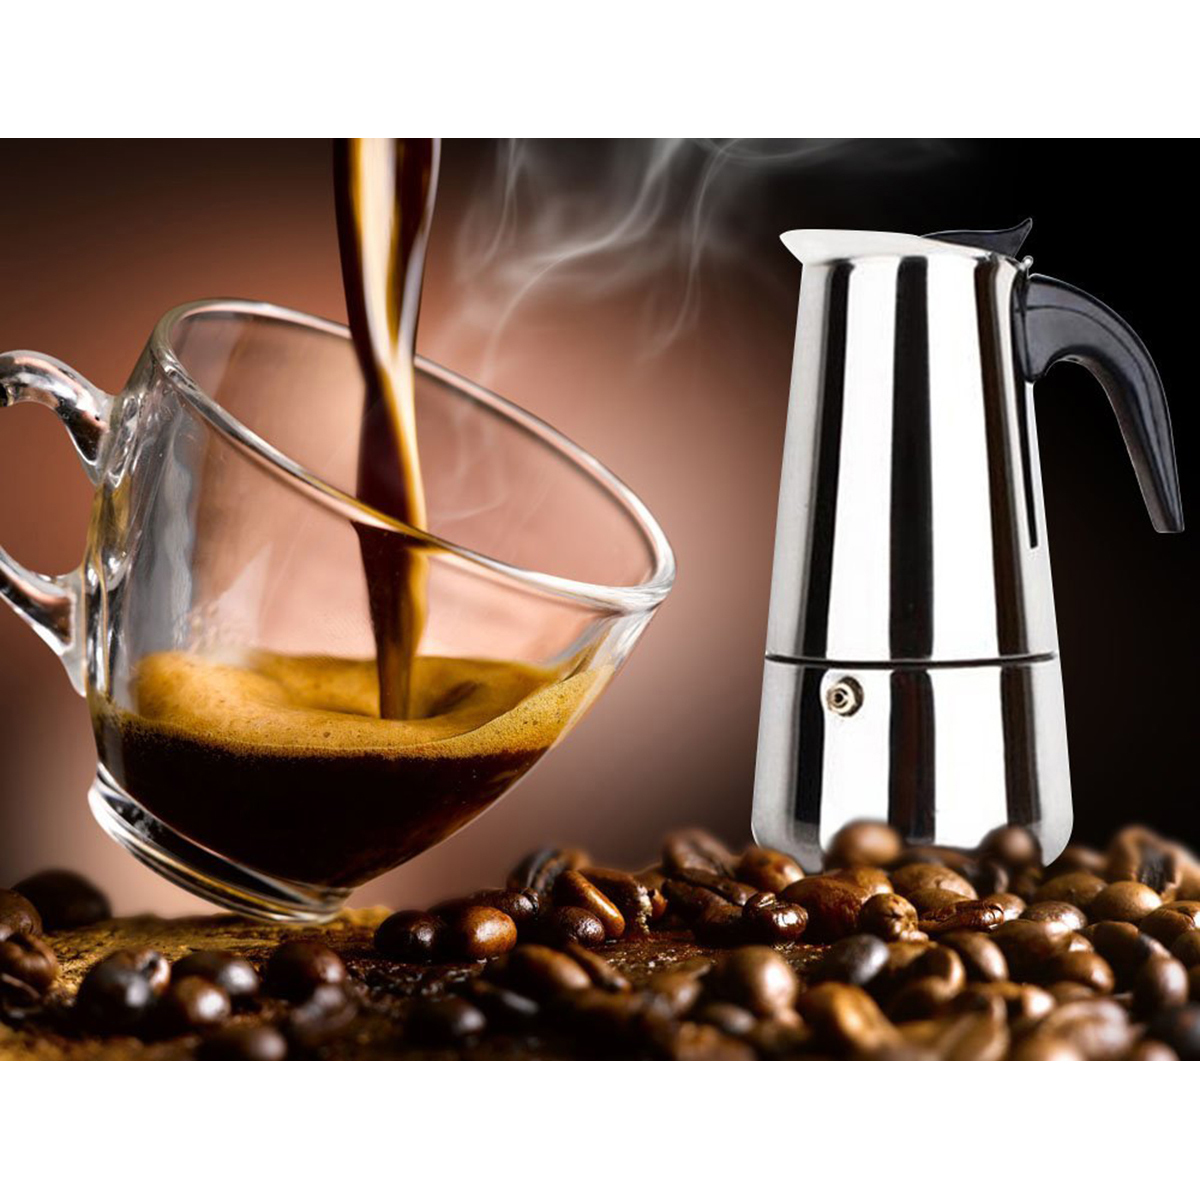 Espresso Moka Coffee Maker Pot Percolator Stainless Steel Electric Stove Electric Coffee Kettle 40